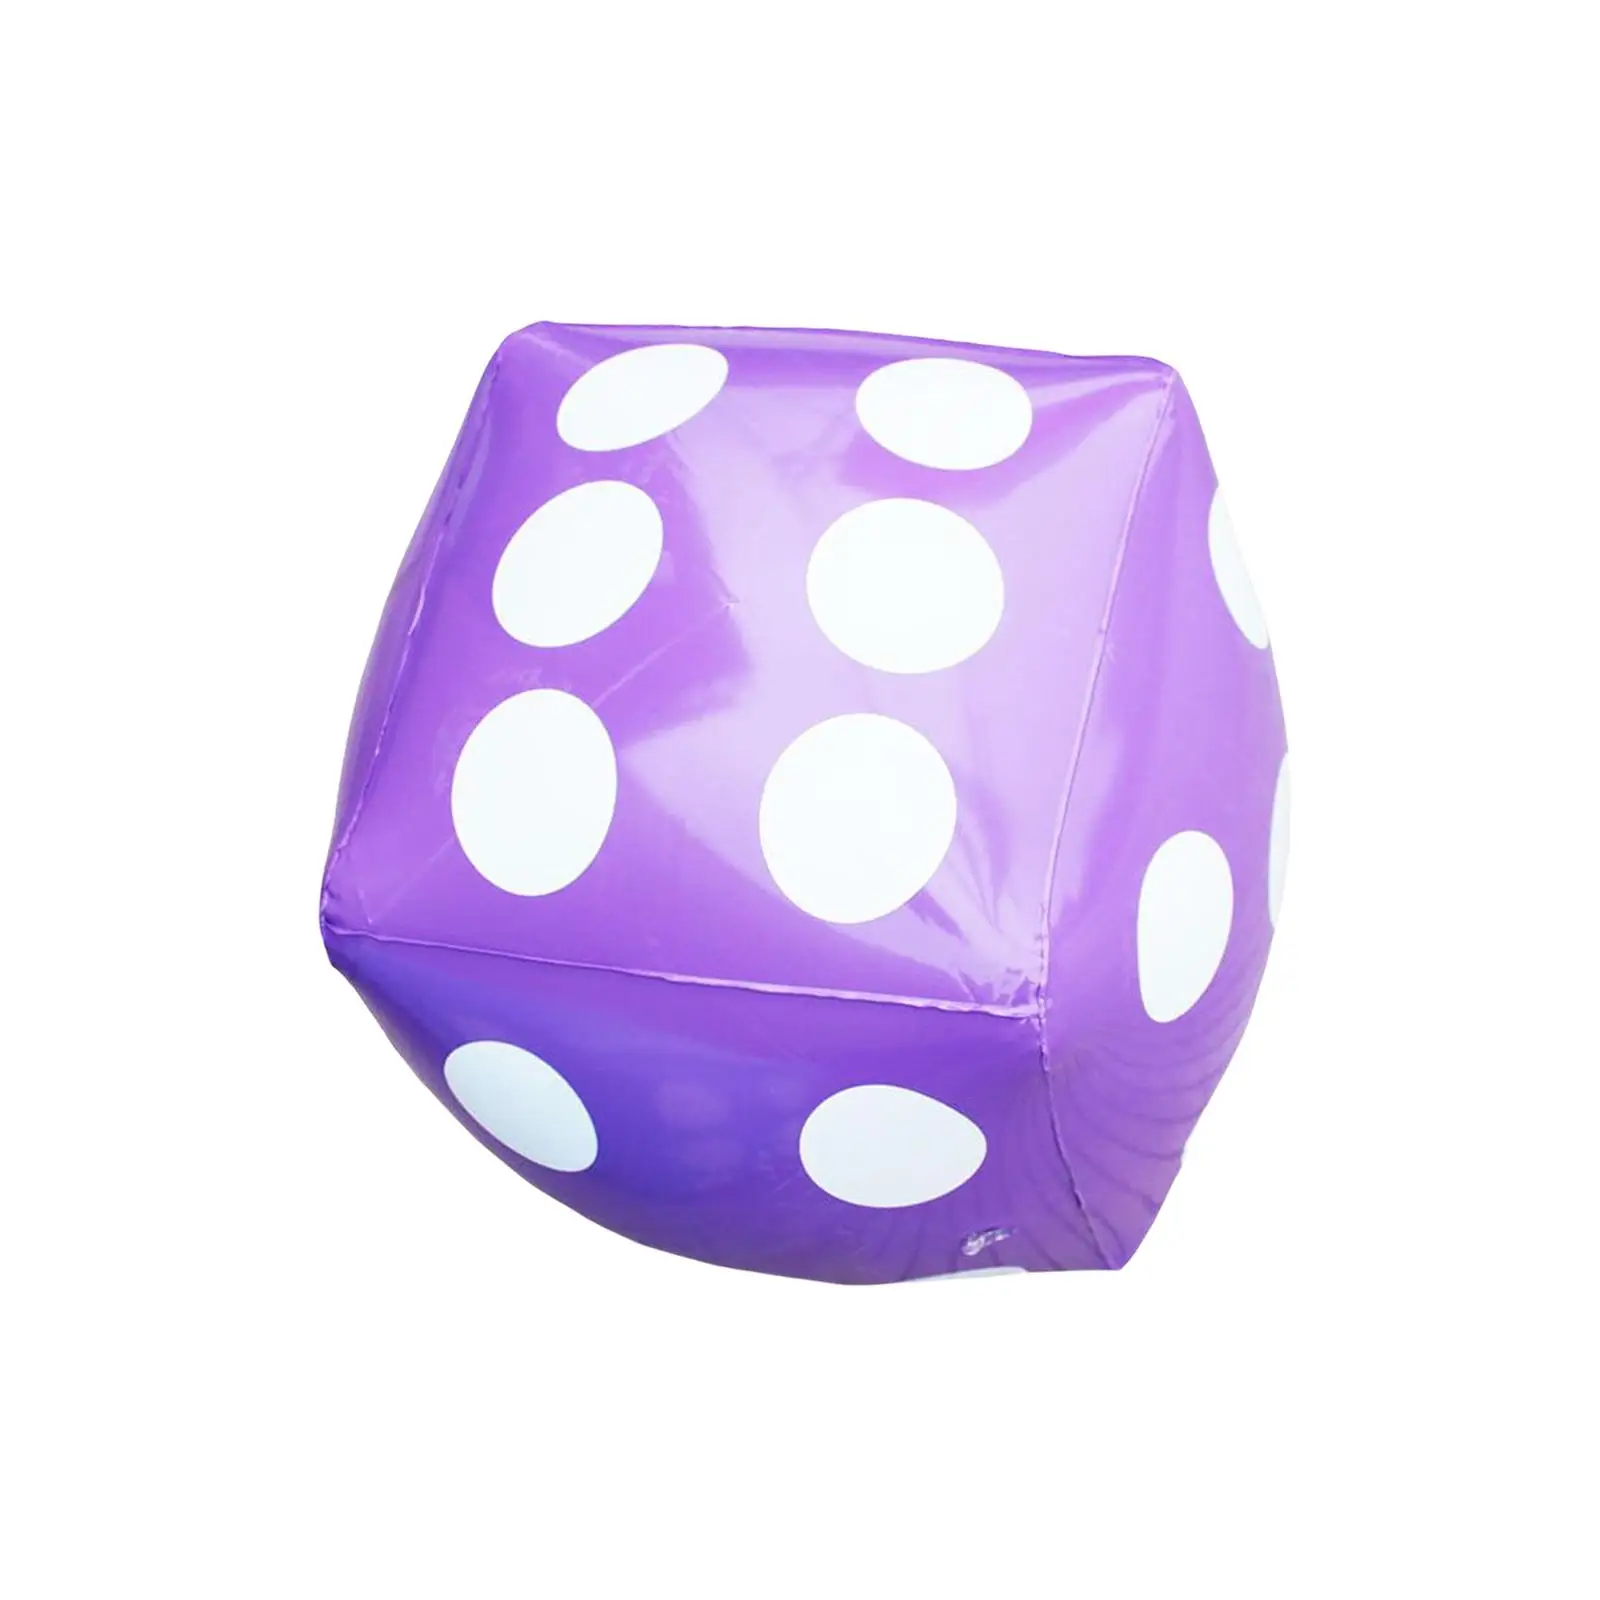 Inflatable Toys Dice Novelty Funny Decoration 23.62`` Cube Jumbo Inflatable Dice for Yard Indoor Outdoor Stage Props Home Pools